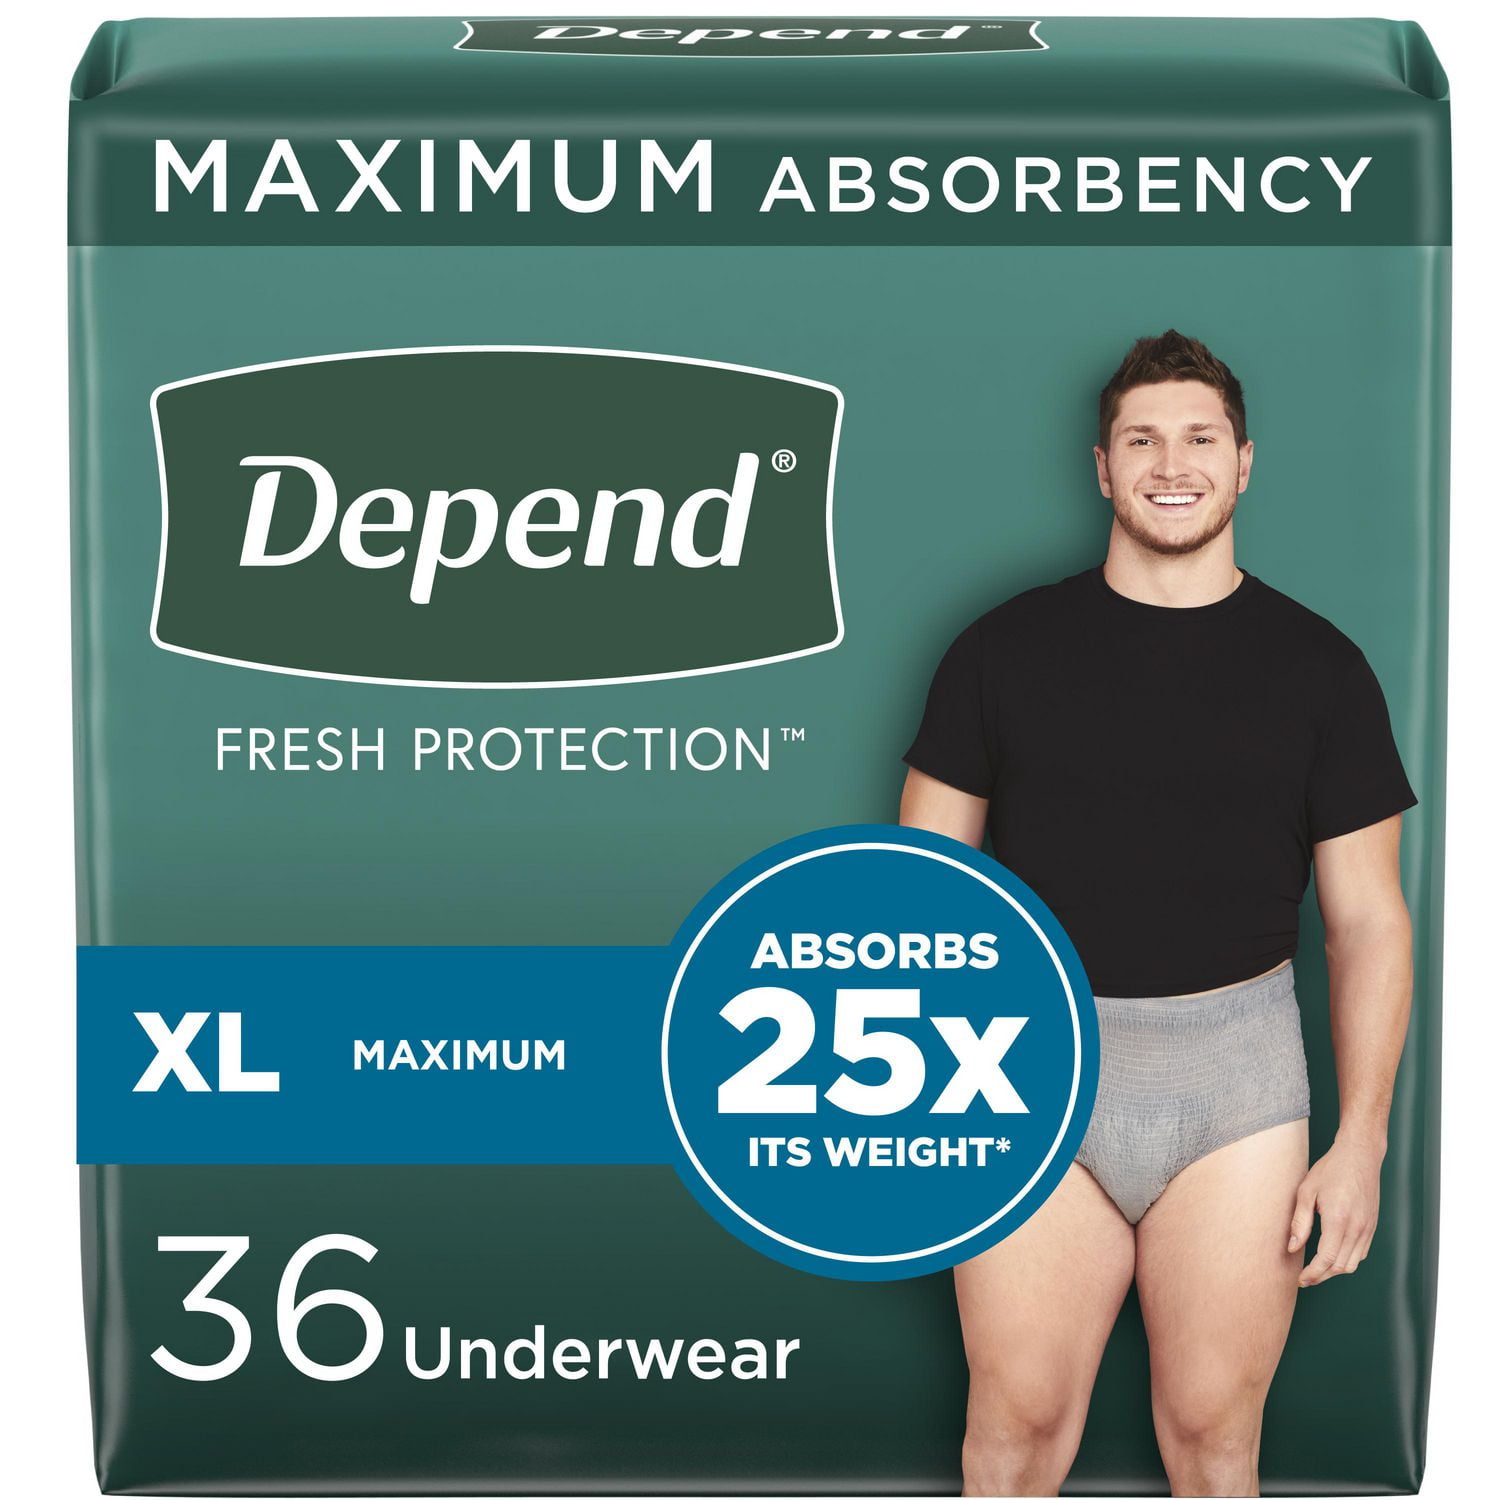 Depend Fresh Protection Adult Incontinence Underwear for Men